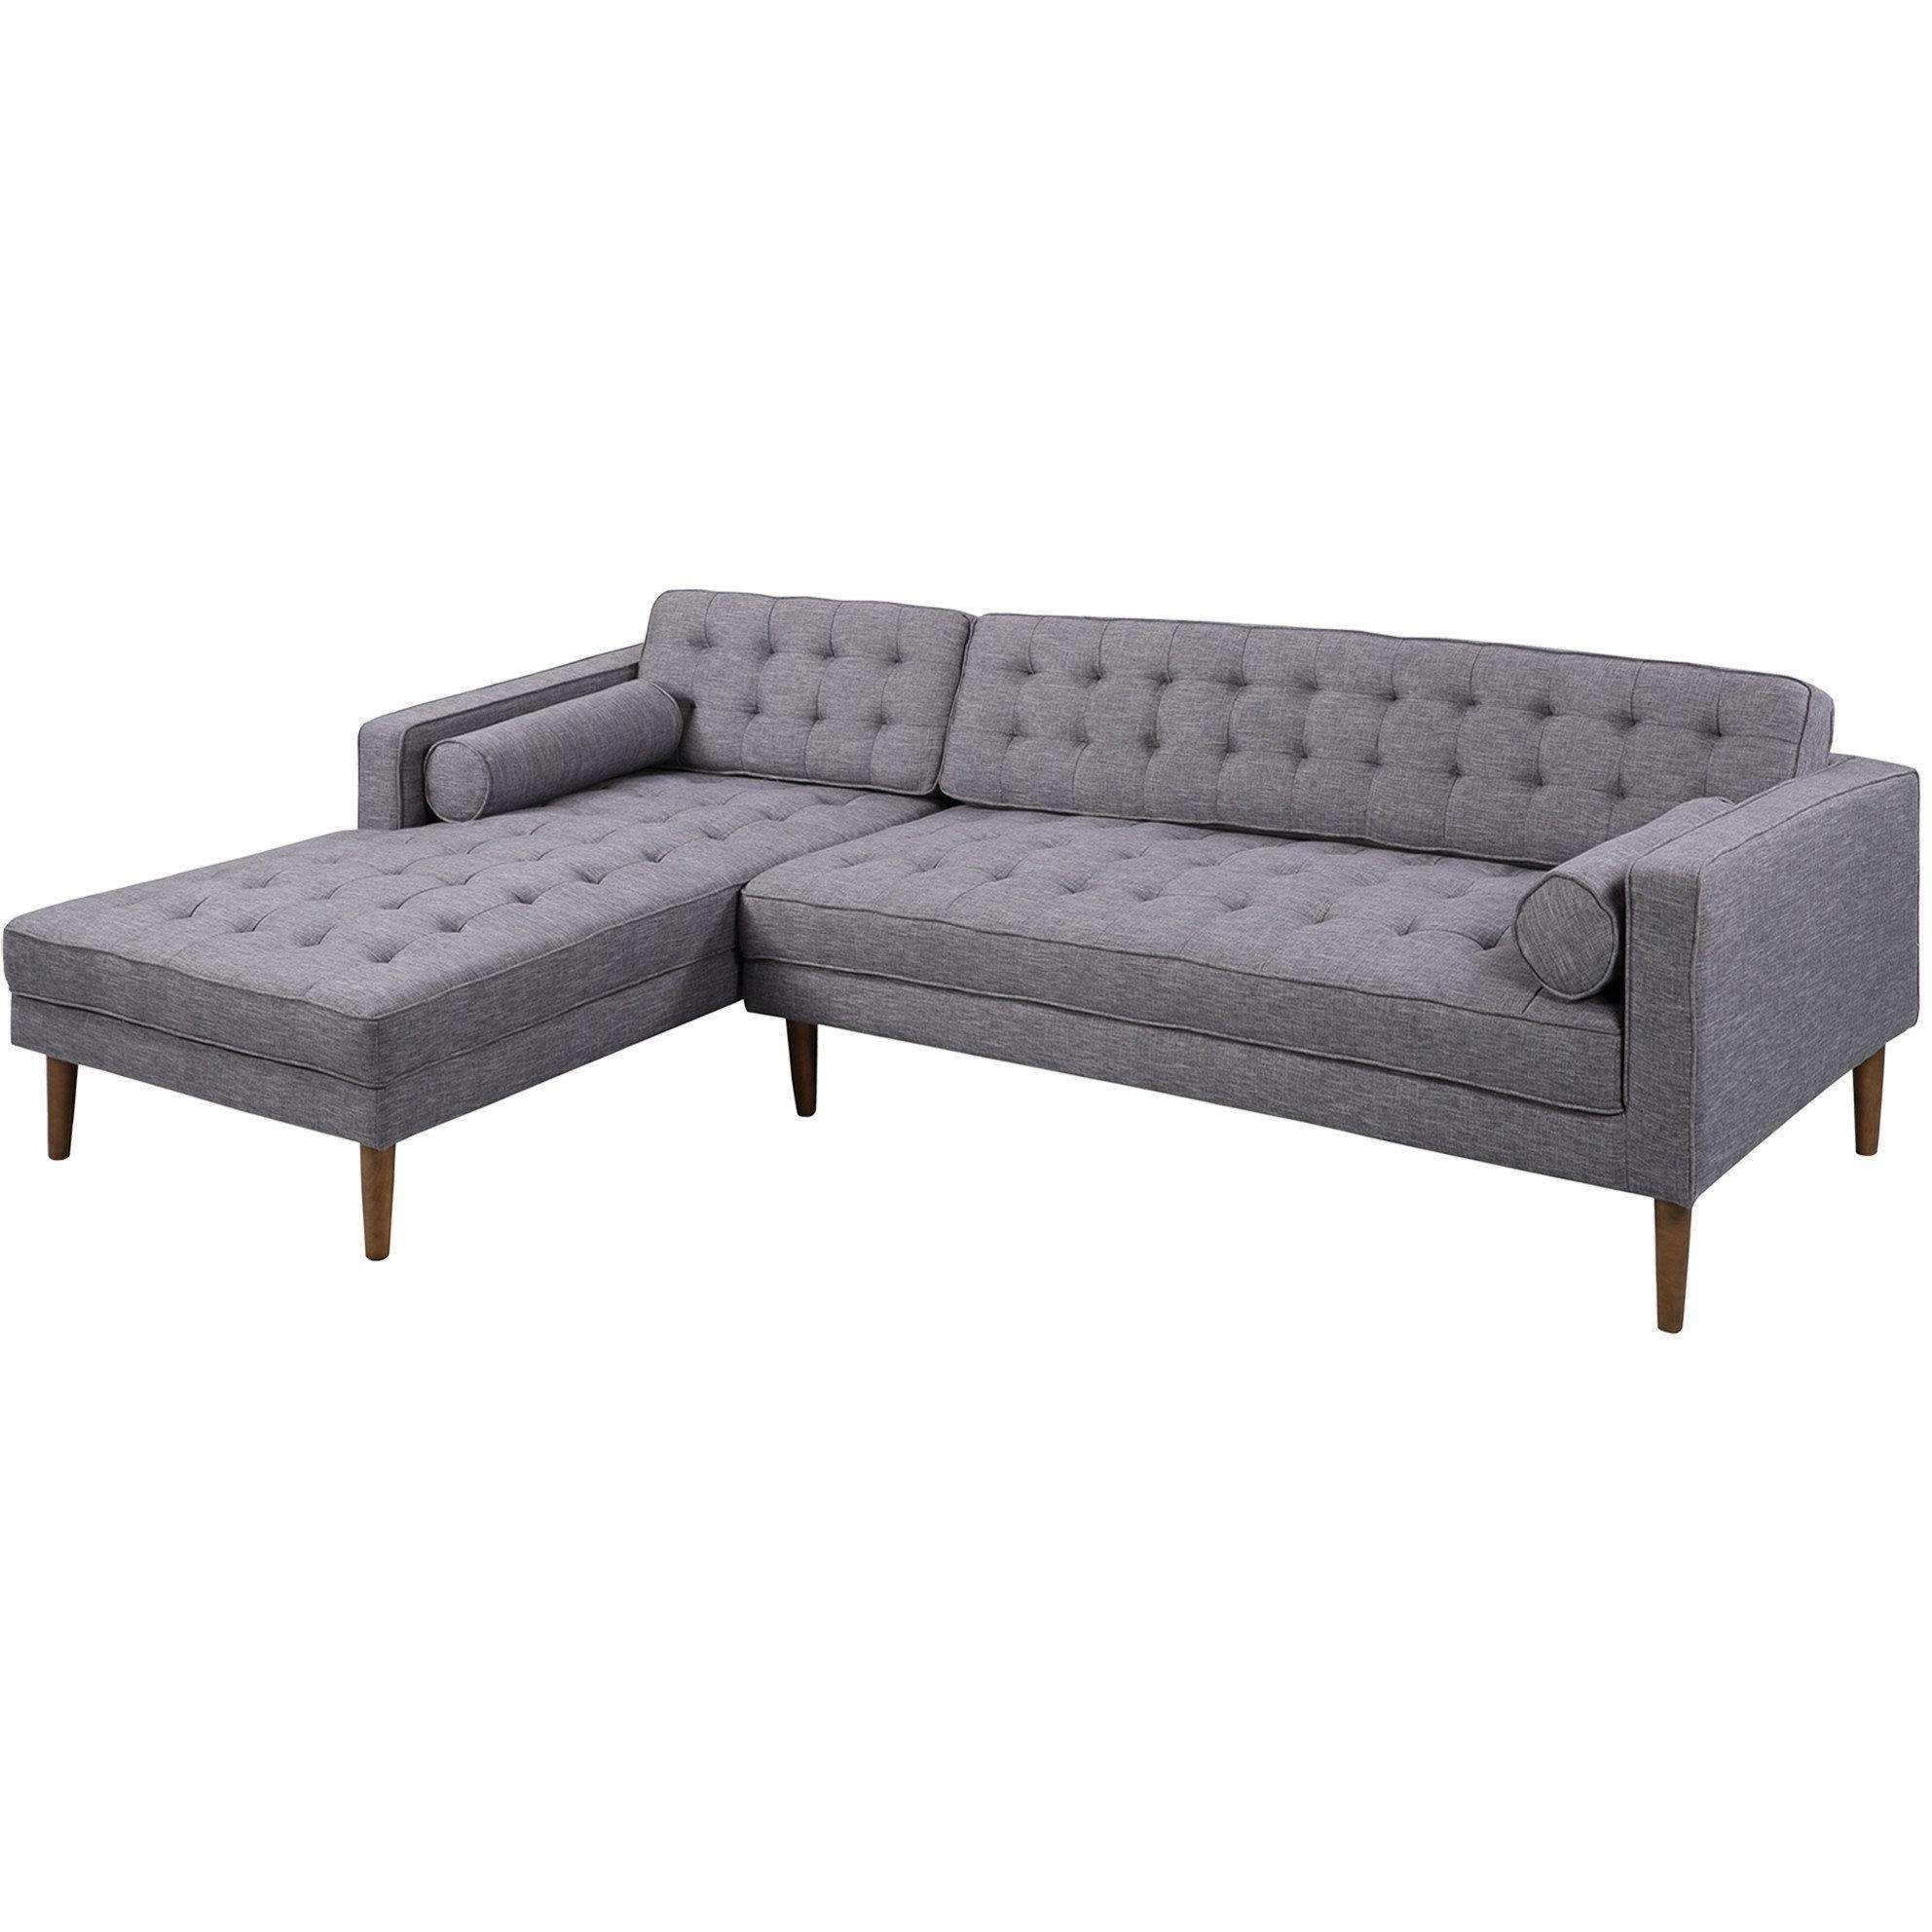 Armen Living Element Right Side Chaise Sectional In Dark Within Most Current Element Left Side Chaise Sectional Sofas In Dark Gray Linen And Walnut Legs (View 5 of 20)